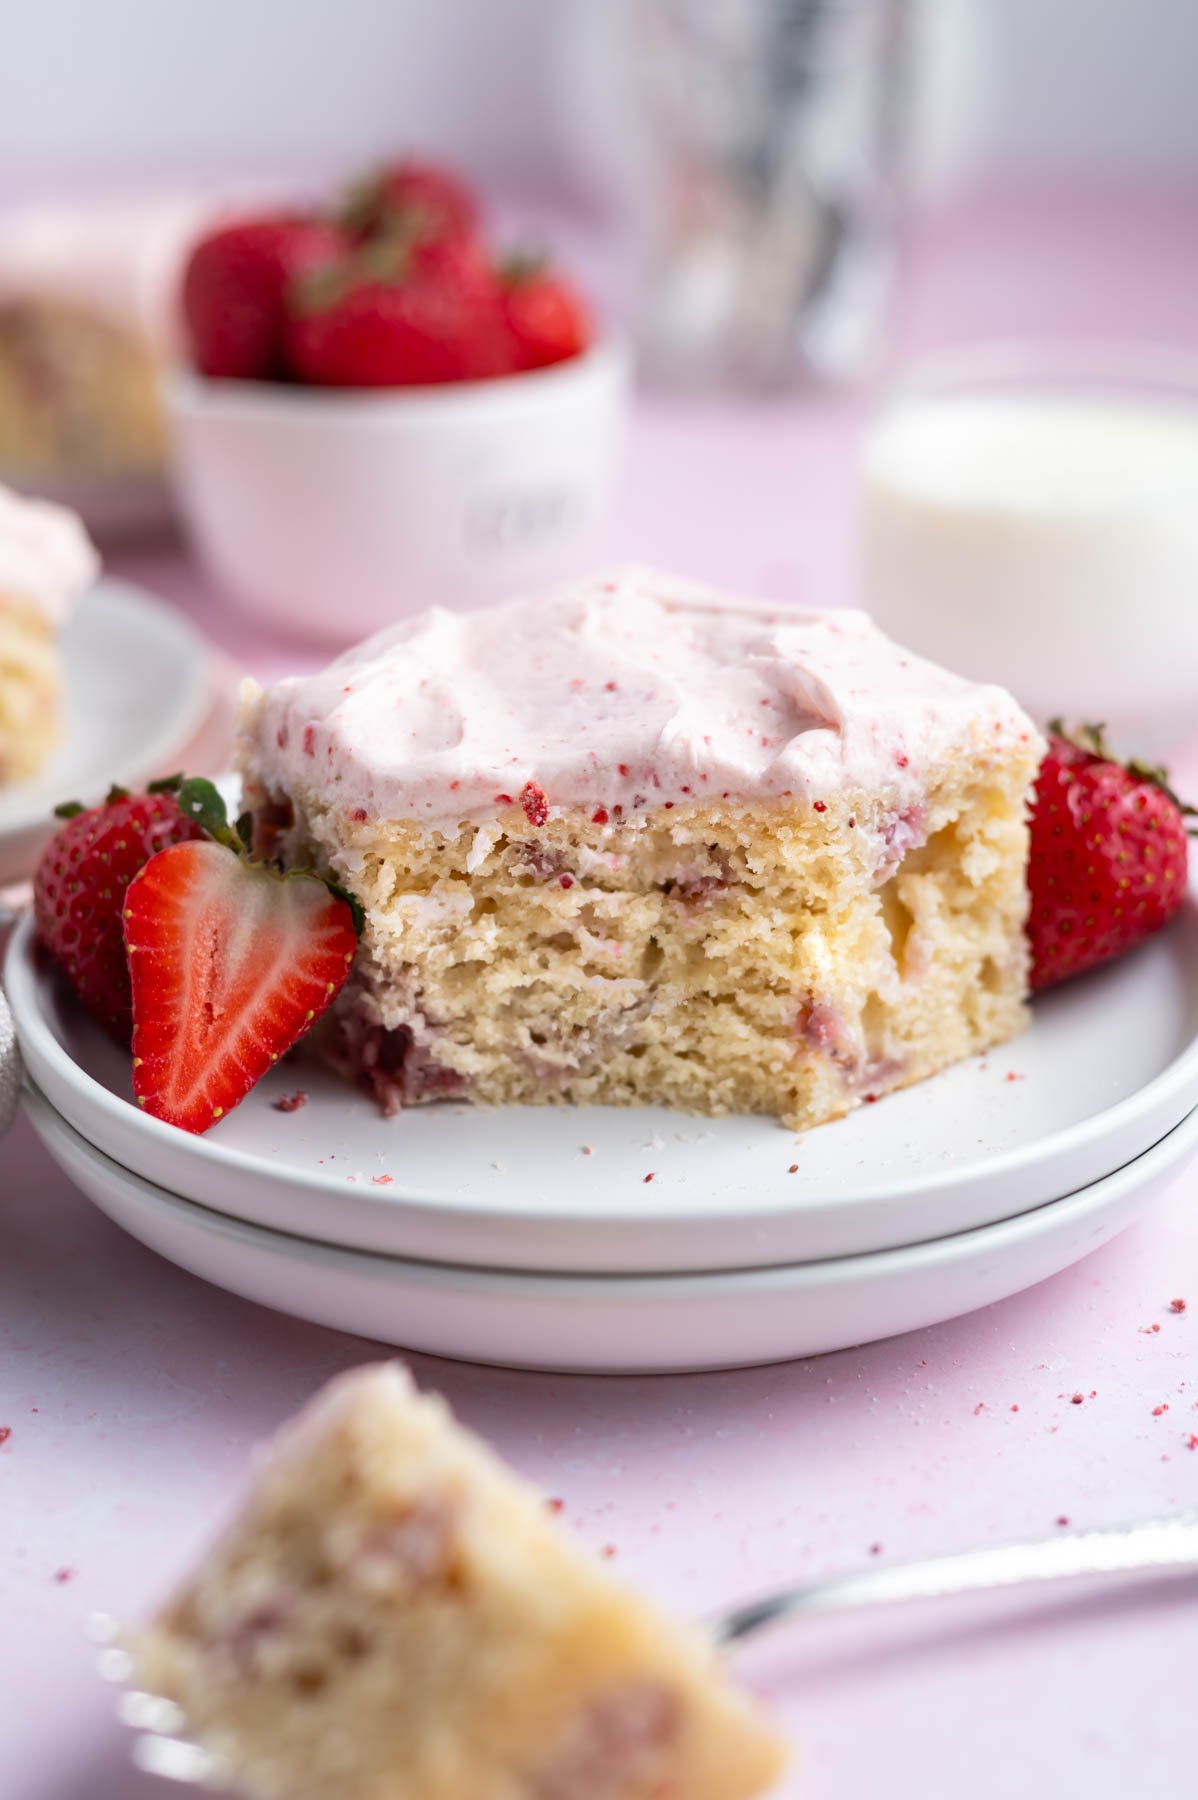 slice of strawberry snack cake with a bite missing on a plate